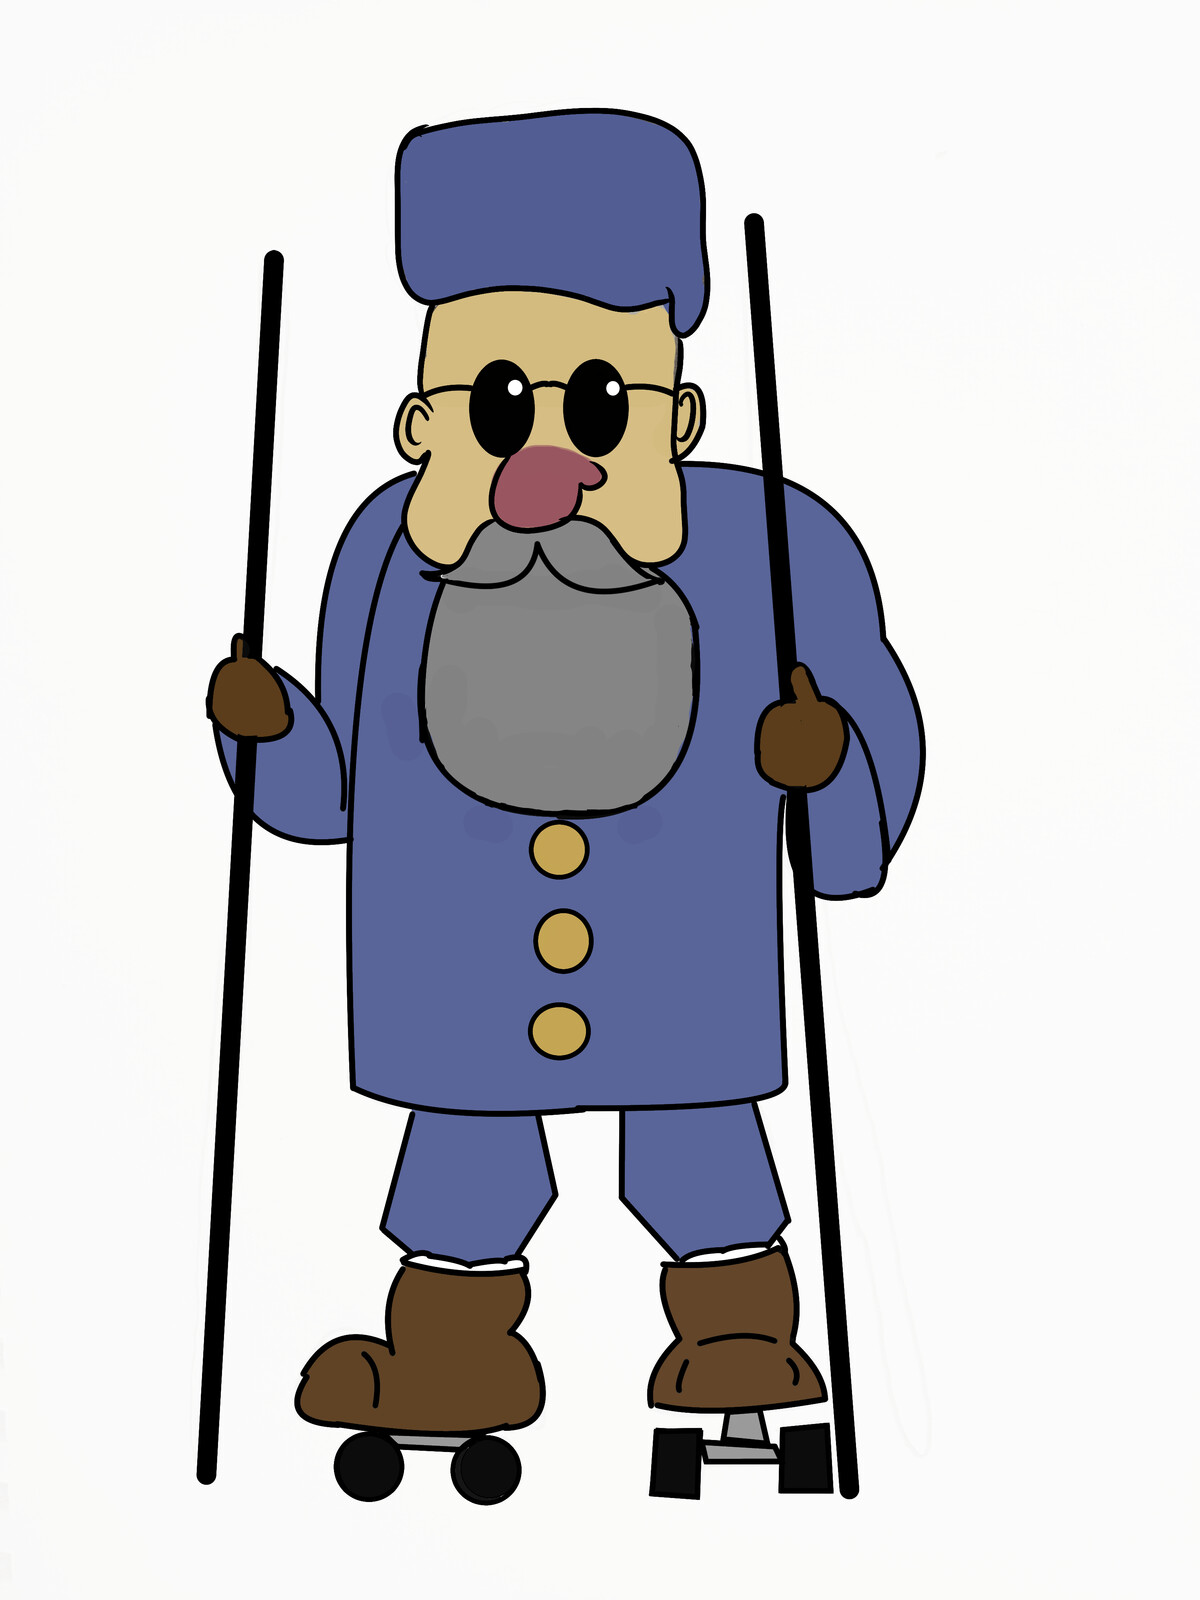 A Man created with basic shapes for easy animation, who follows his friend in his new hobby.  Inspired by Foggy Dewhurst from The Last Of The Summer Wine and elders in Studio Ghibli films.